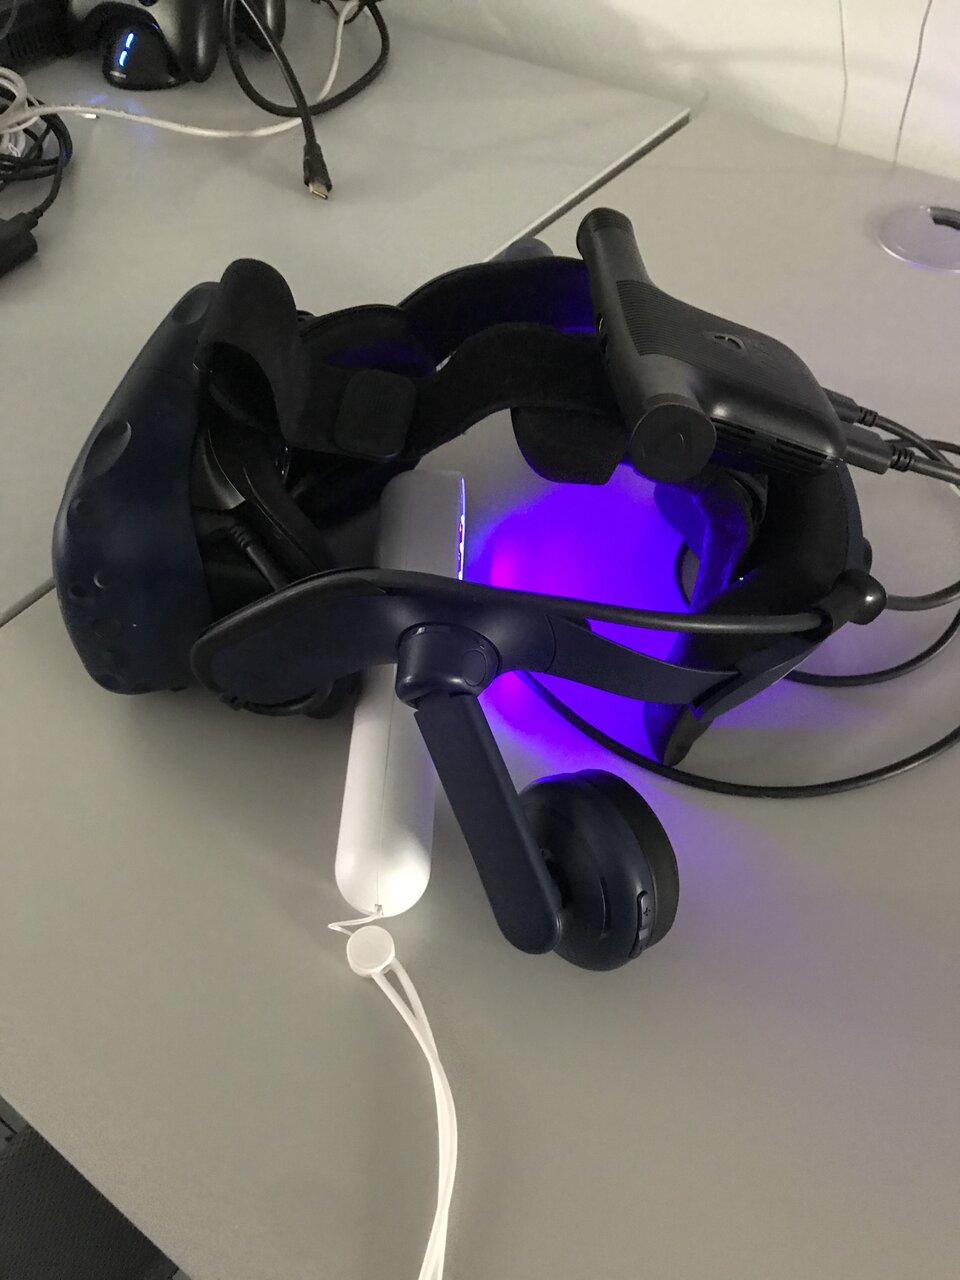 VR goggles are desinfected with portable UV-C lights before being used for astronaut training in EAC